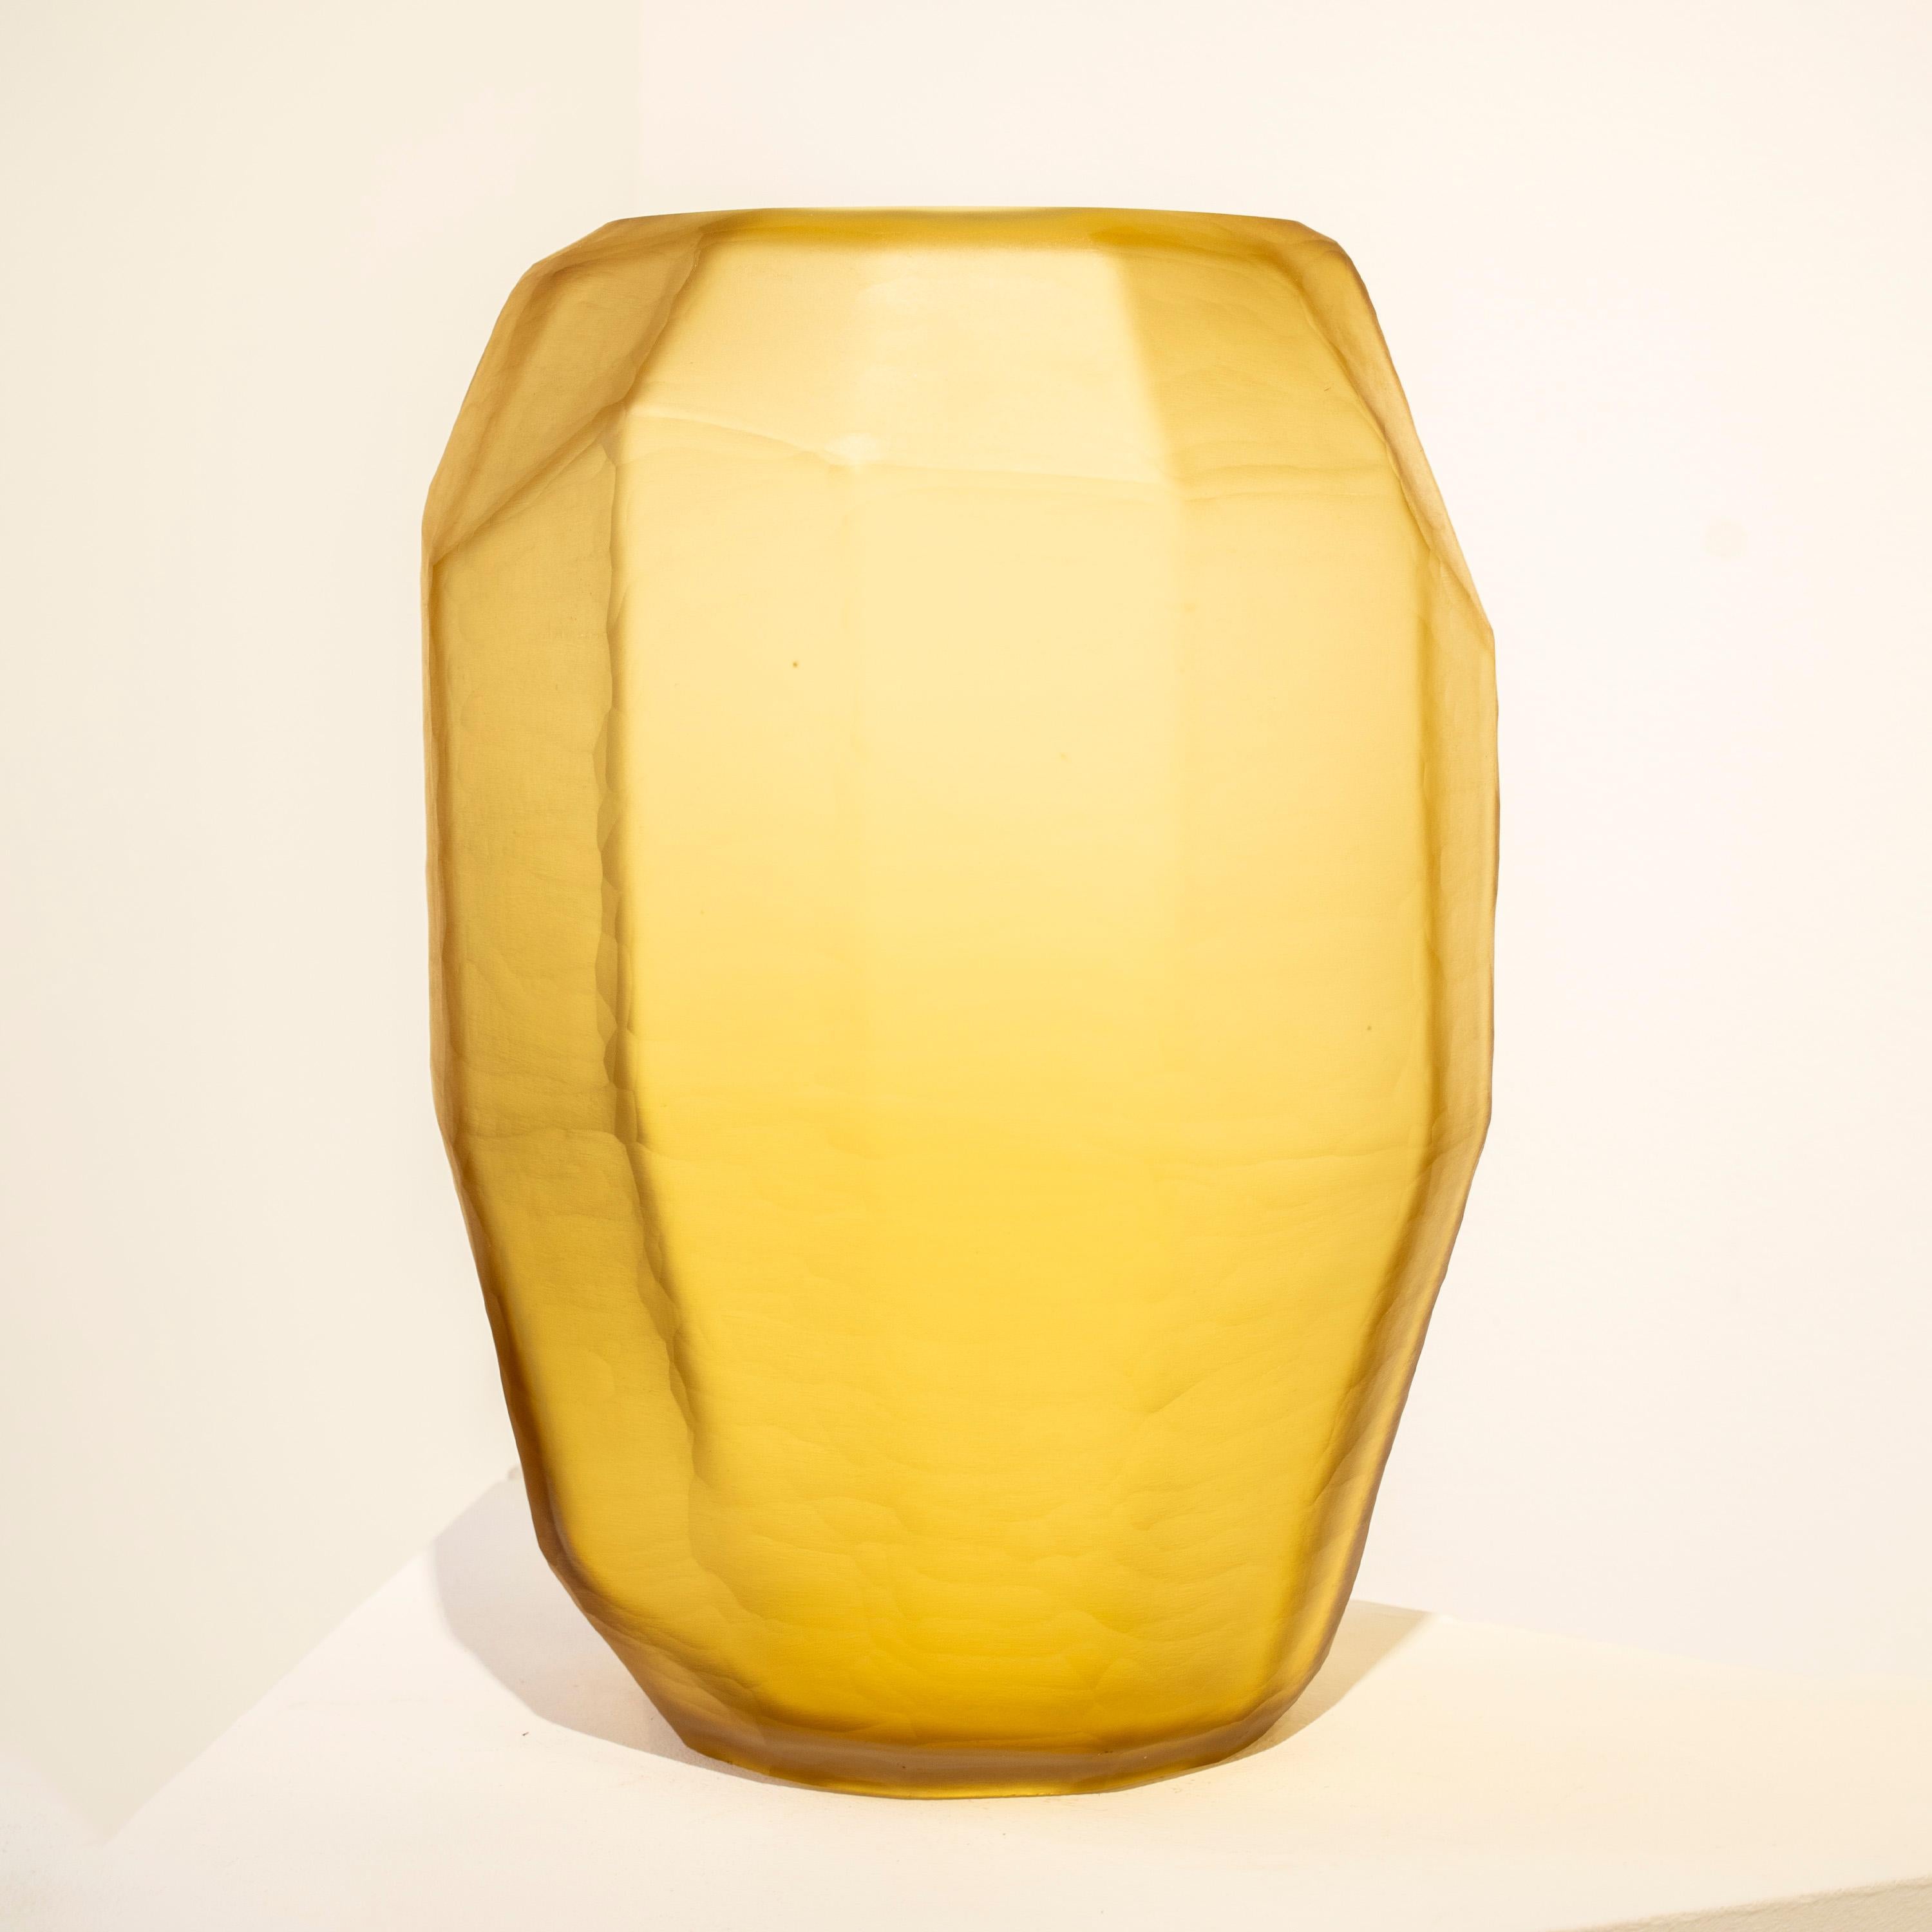 Italian yellow translucid glass vase, with faceted polygonal shape and a matted finish. 